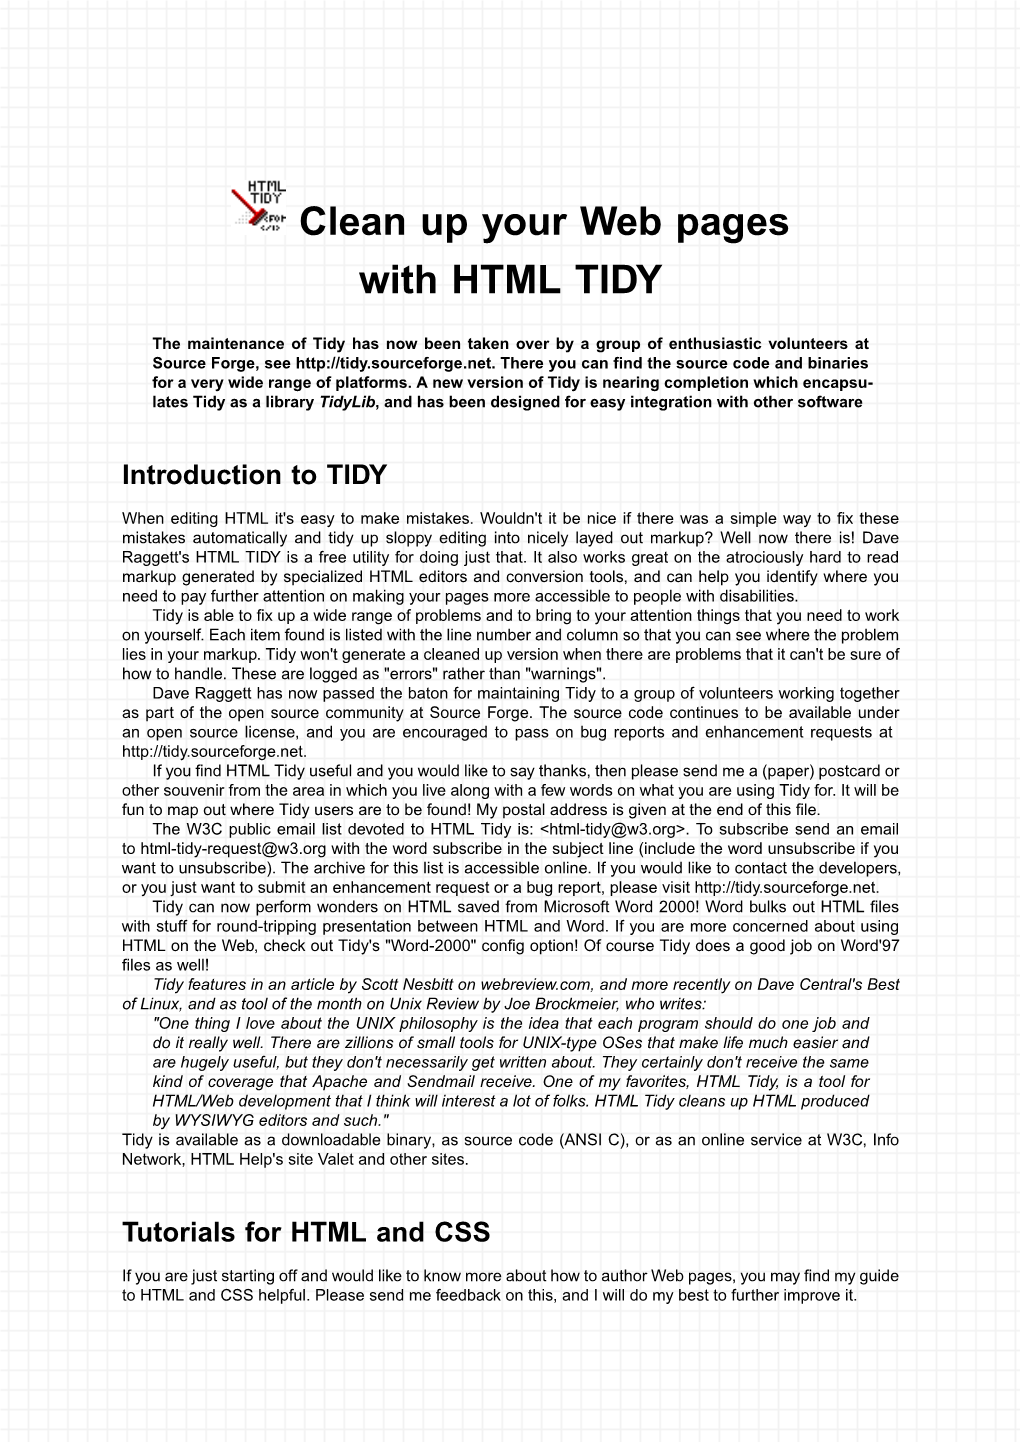 Clean up Your Web Pages with HTML TIDY